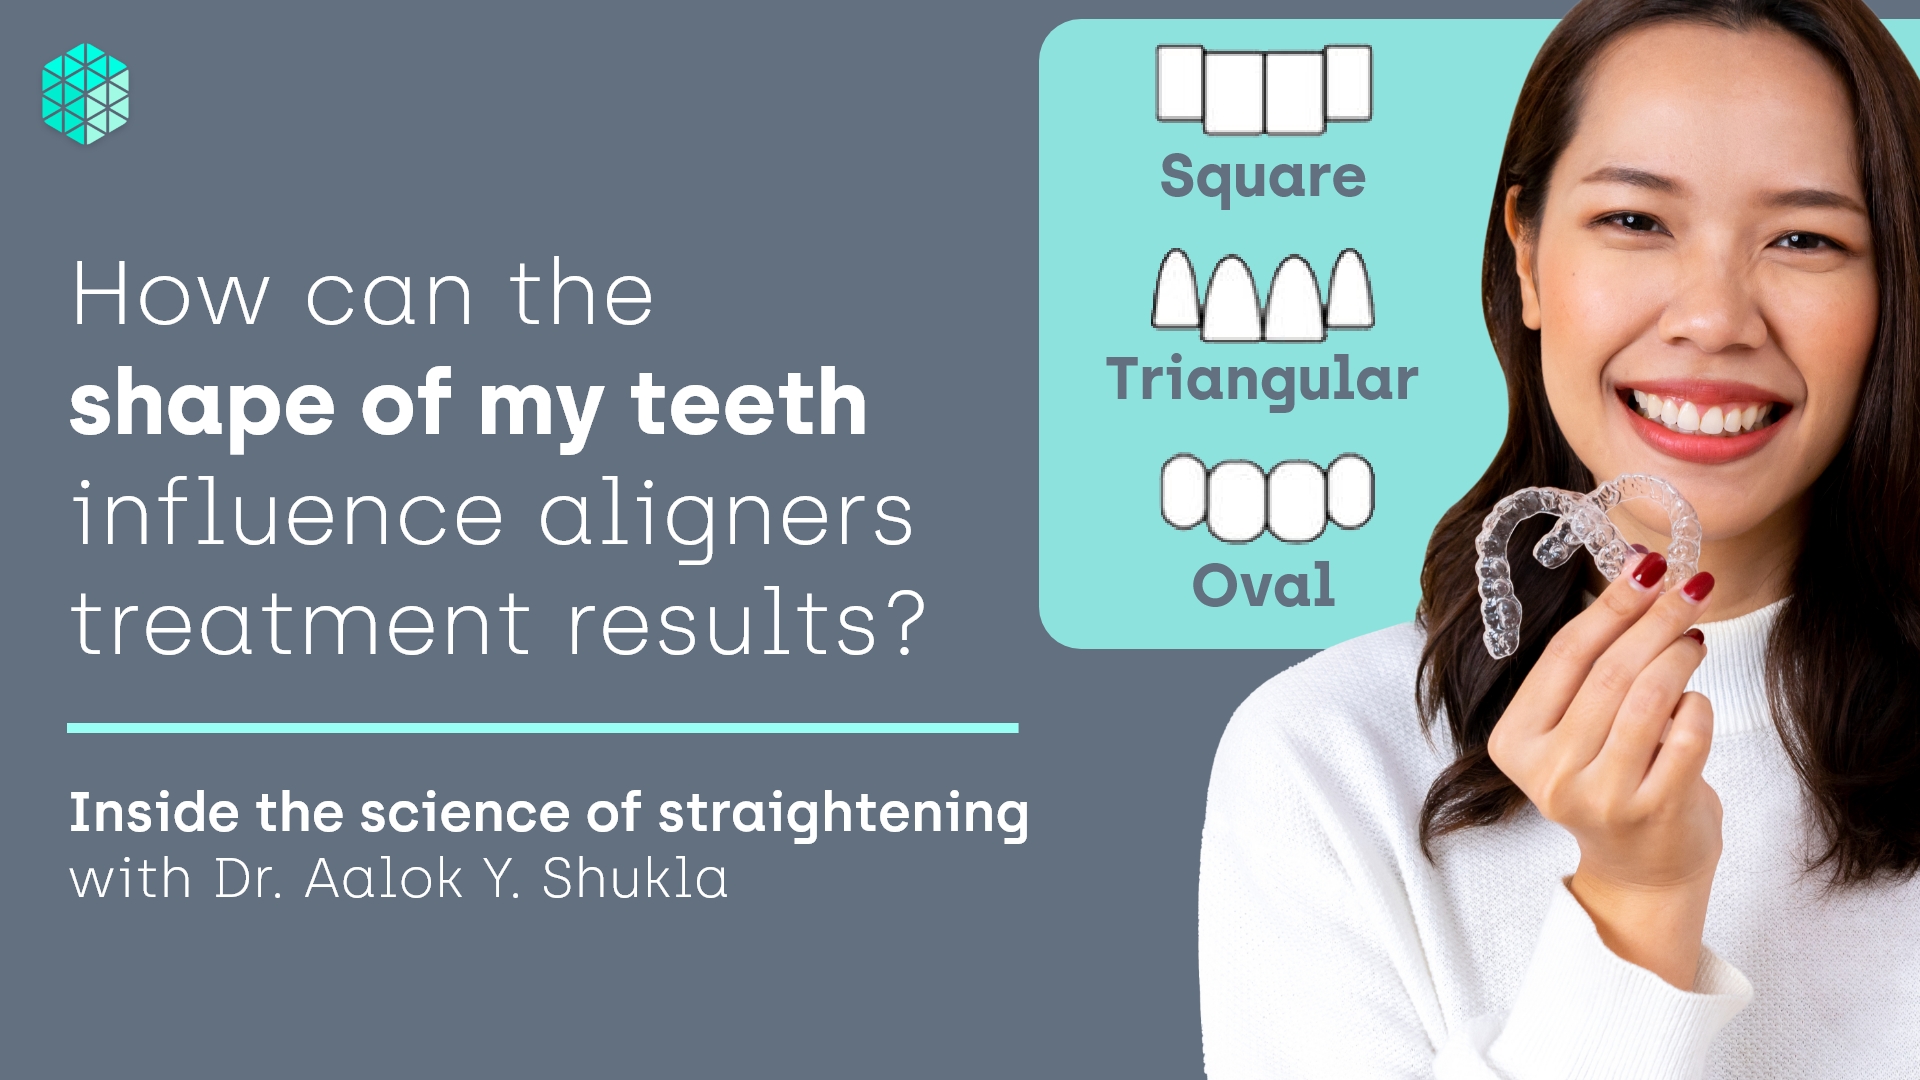 How can the shape of my teeth influence aligners treatment results